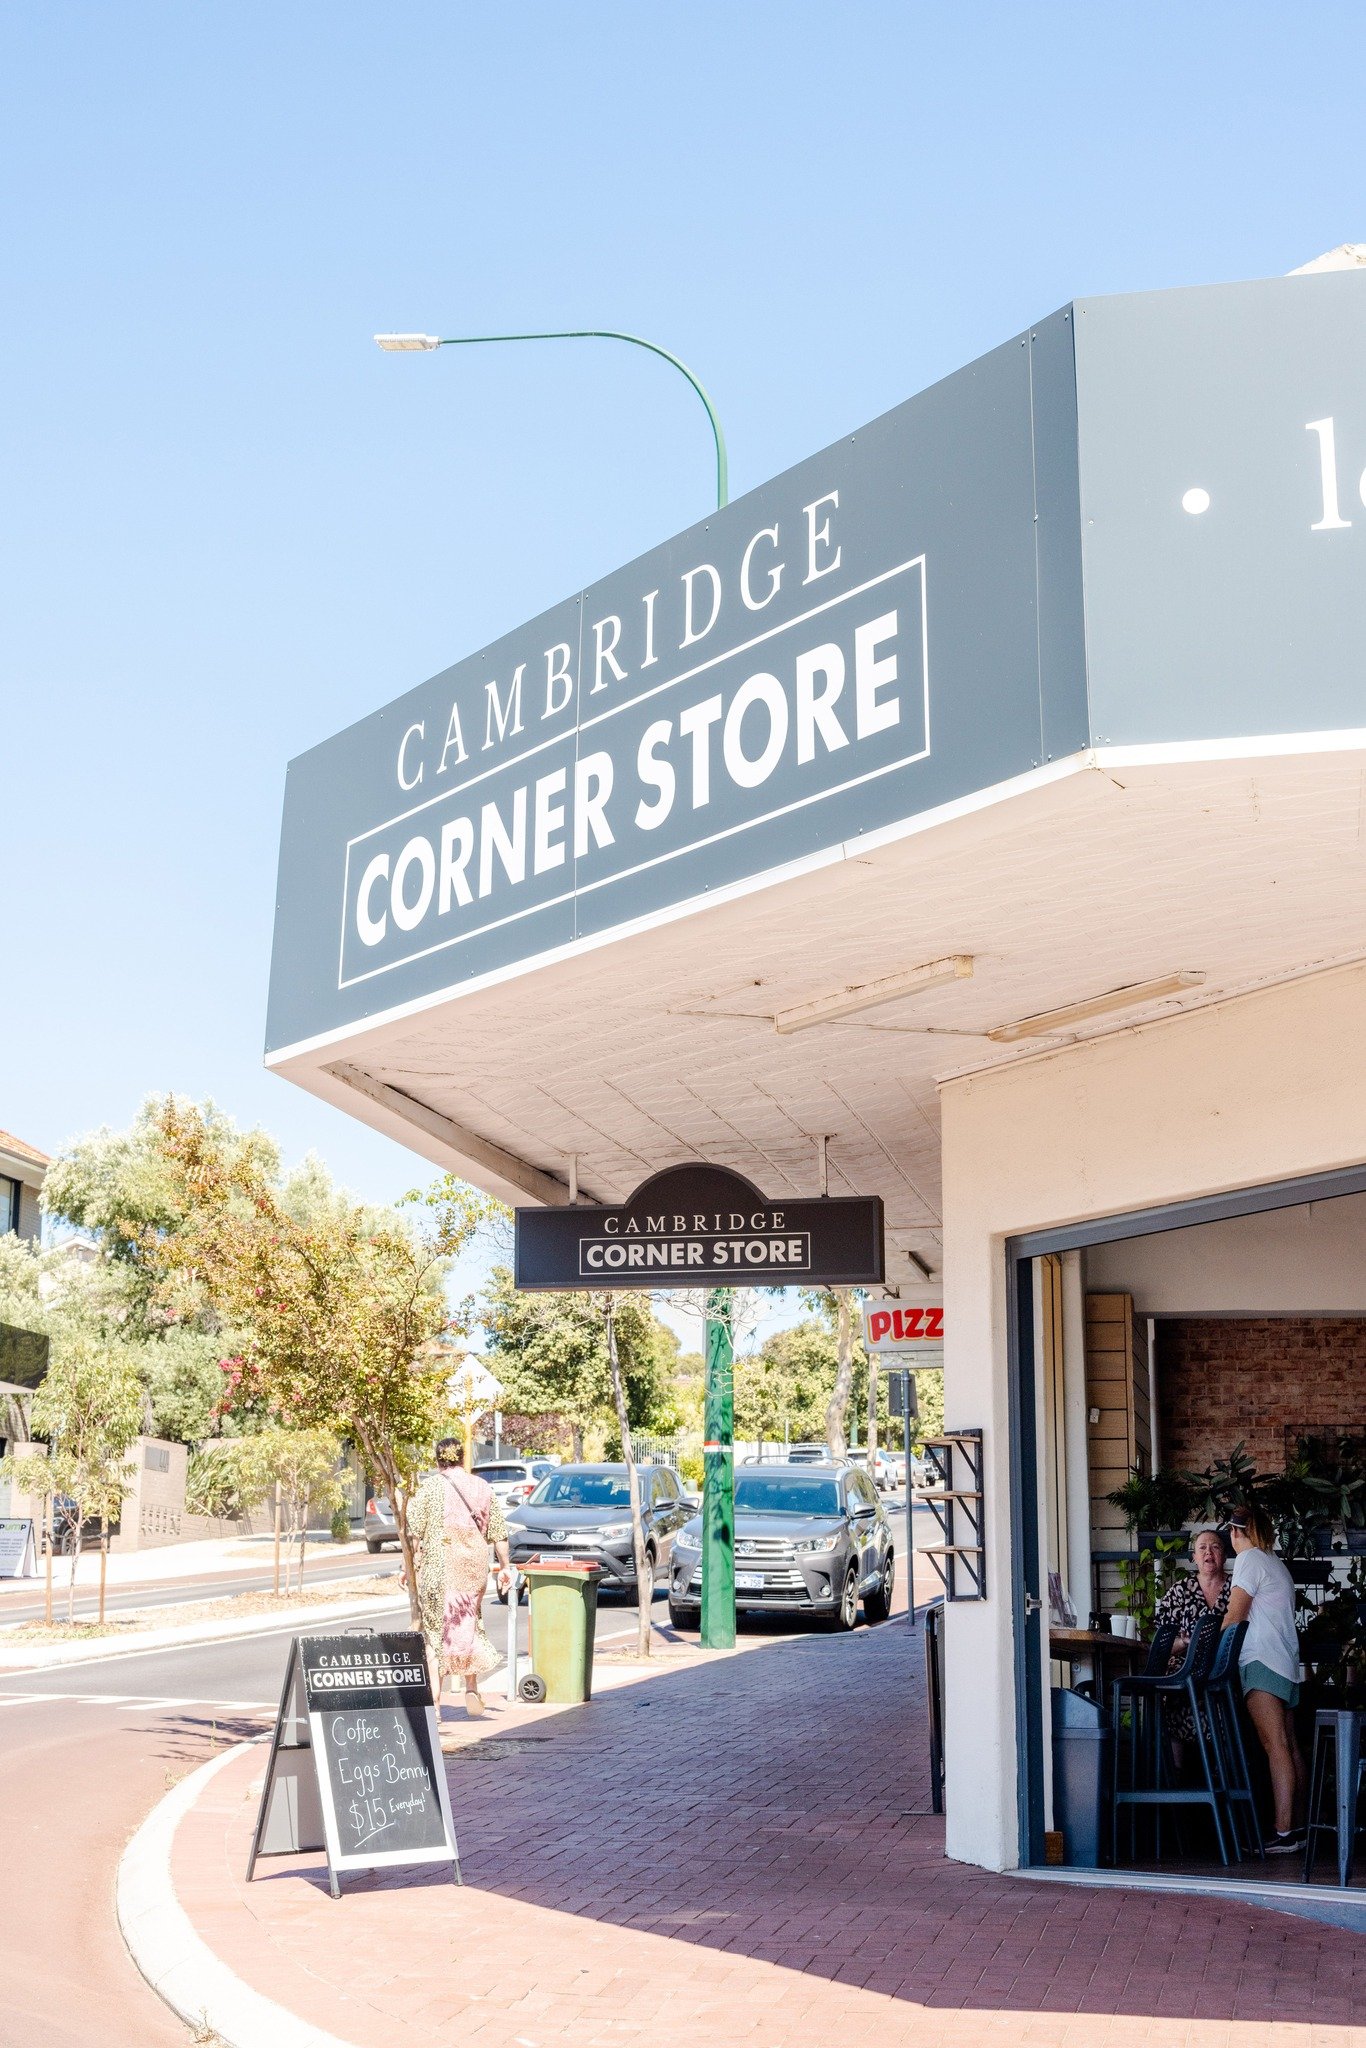 Celebrating all the wonder mums at Cambridge Corner Store tomorrow! We'll be open as usual. Swing by and grab some delicious sweet treats on your way to spoil mum or pop in for brunch with the fam.